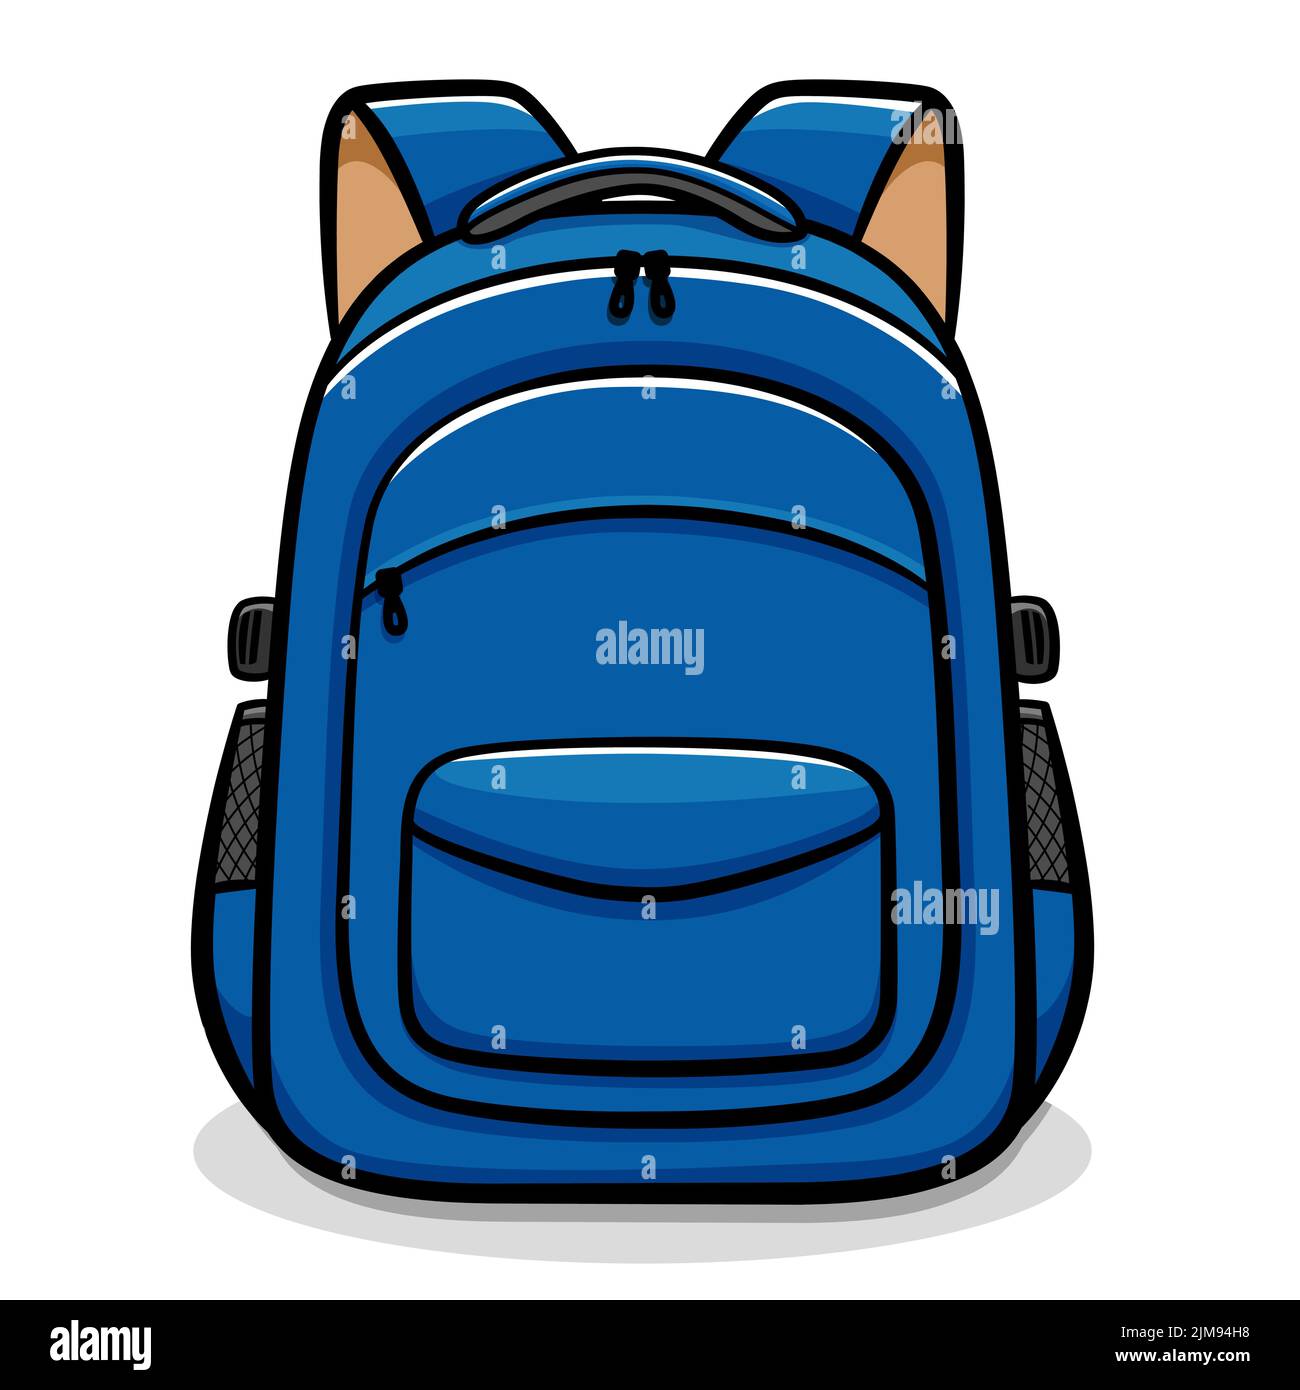 blue backpack or school bag isolated illustration Stock Vector